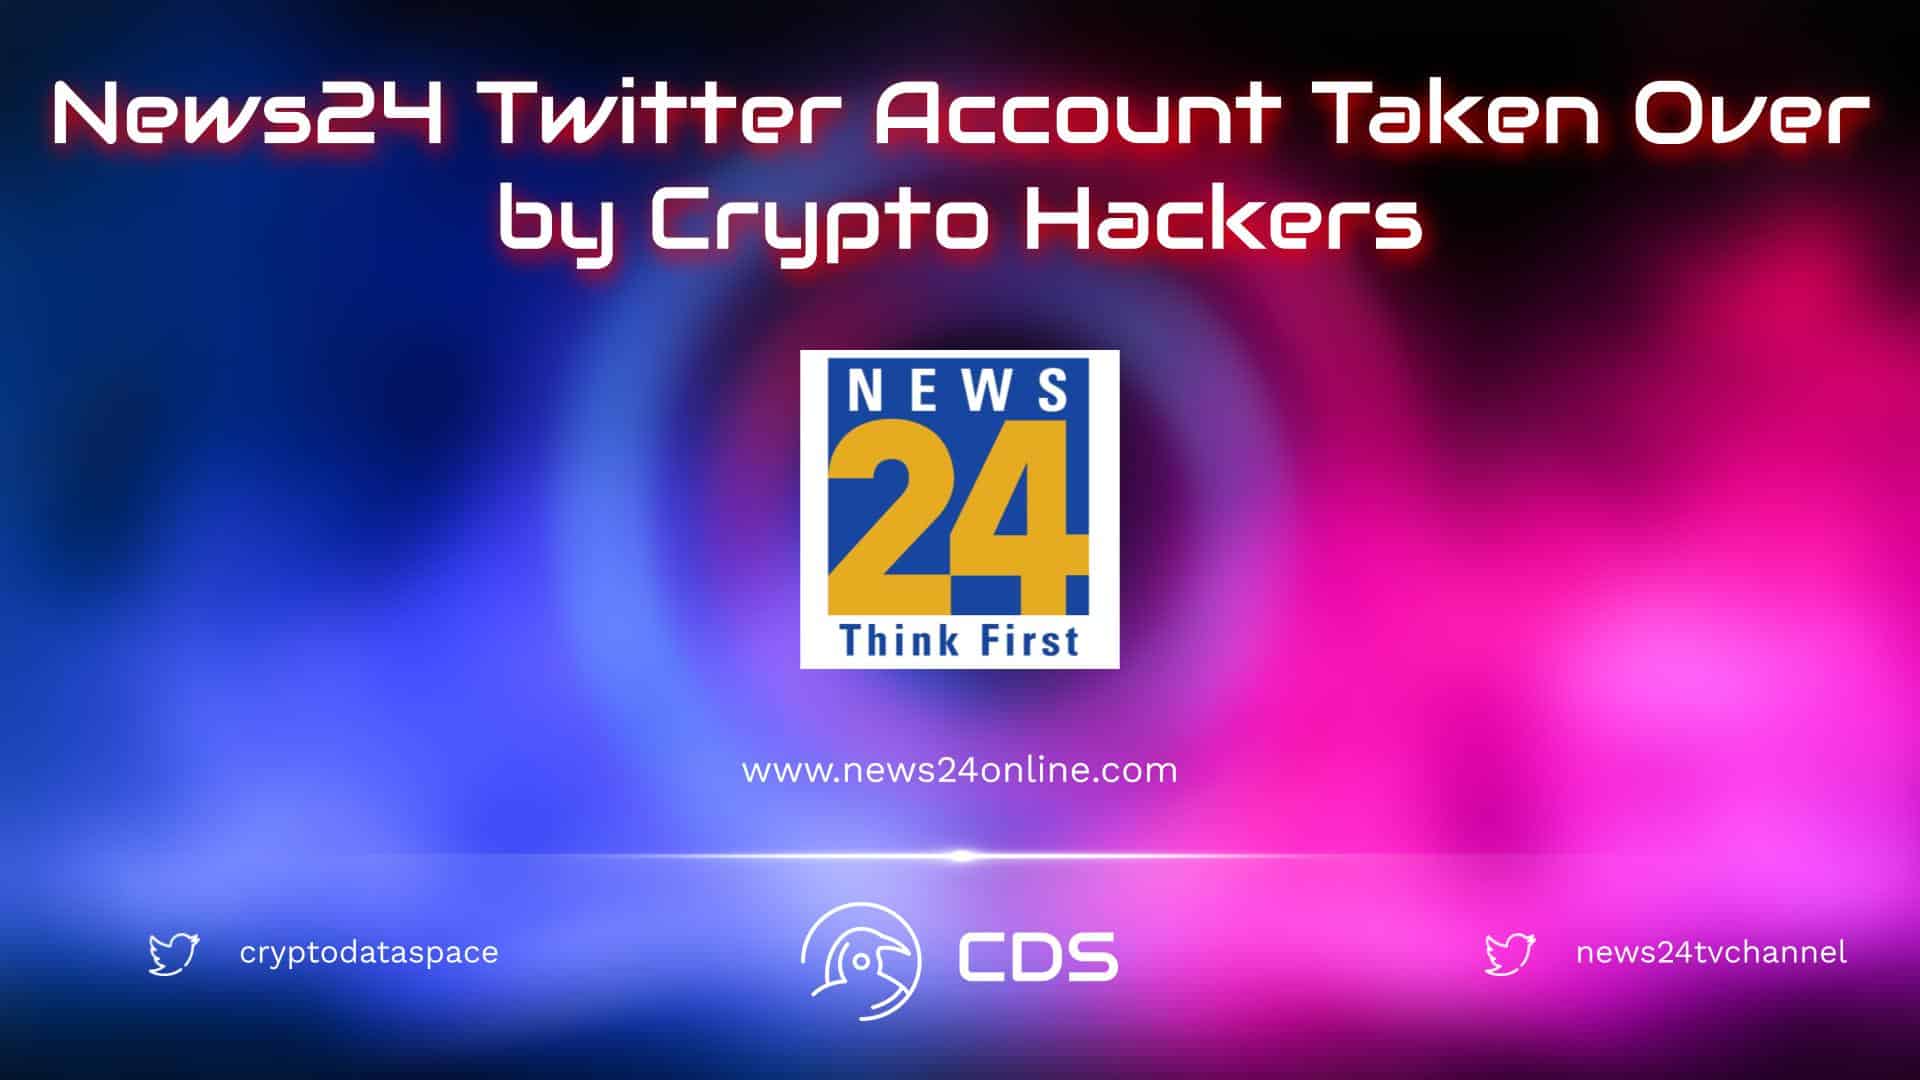 News24 Twitter Account Taken Over by Crypto Hackers